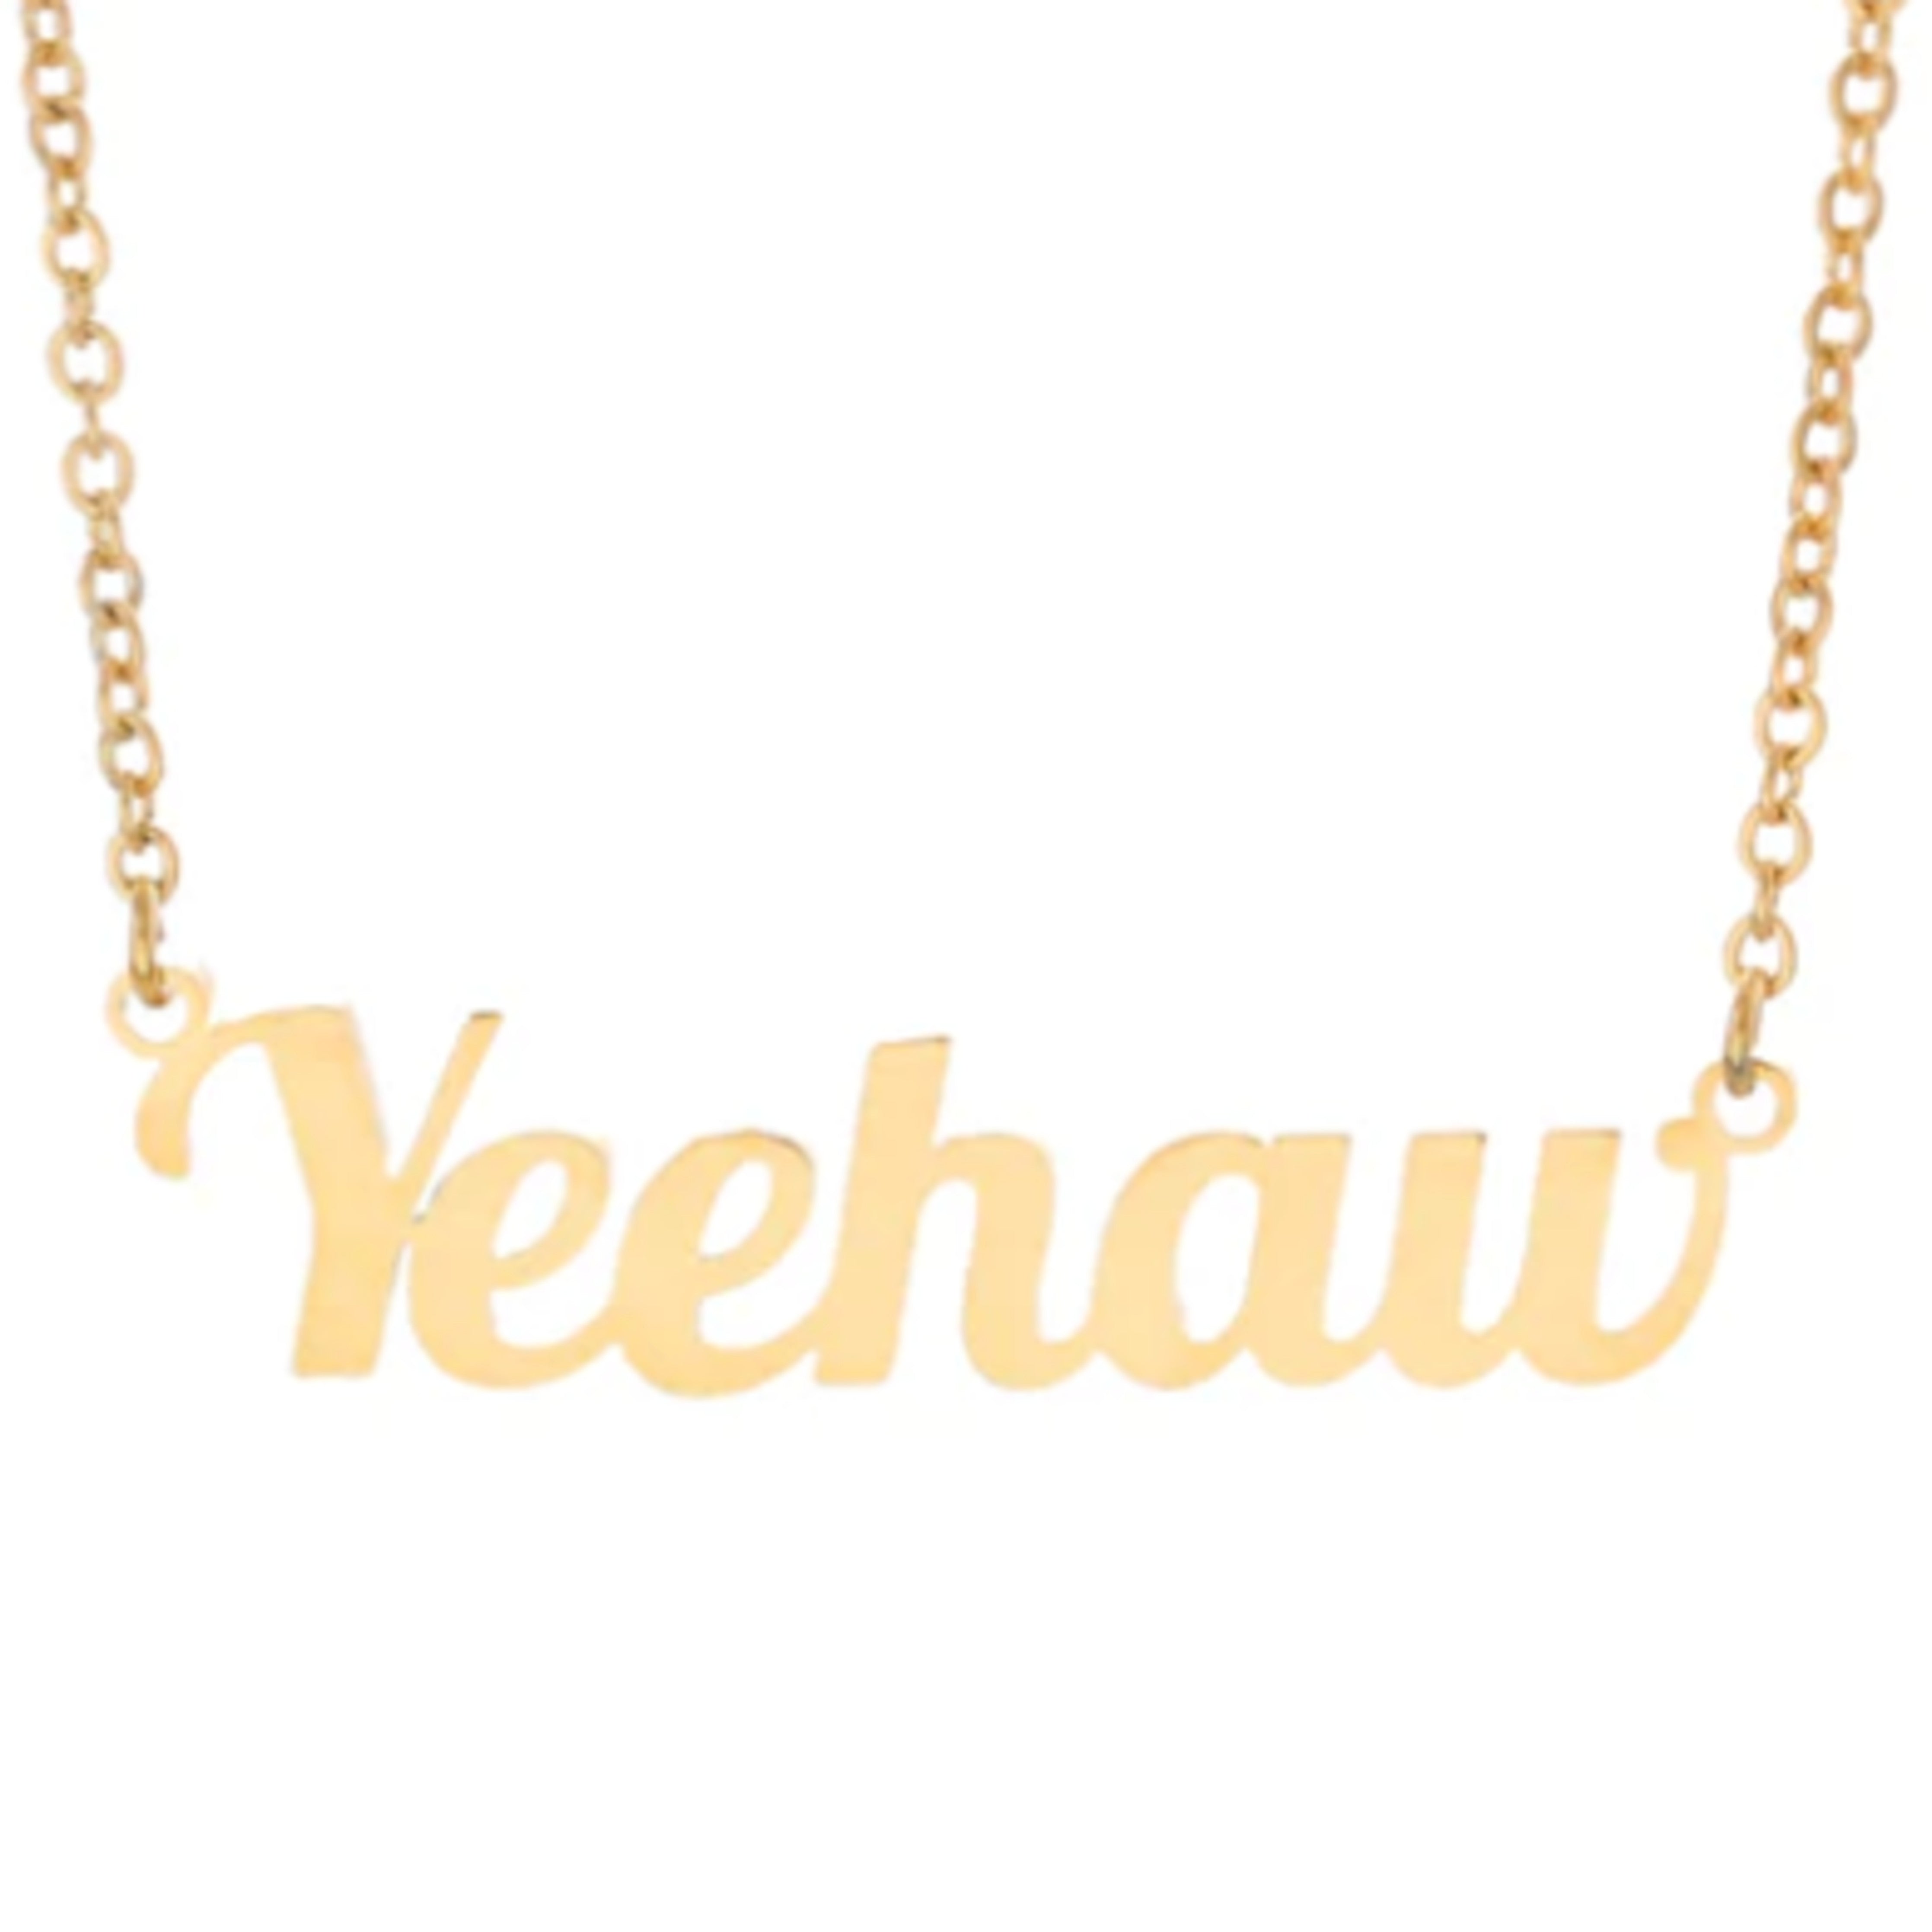 Elcee Nameplate Necklace